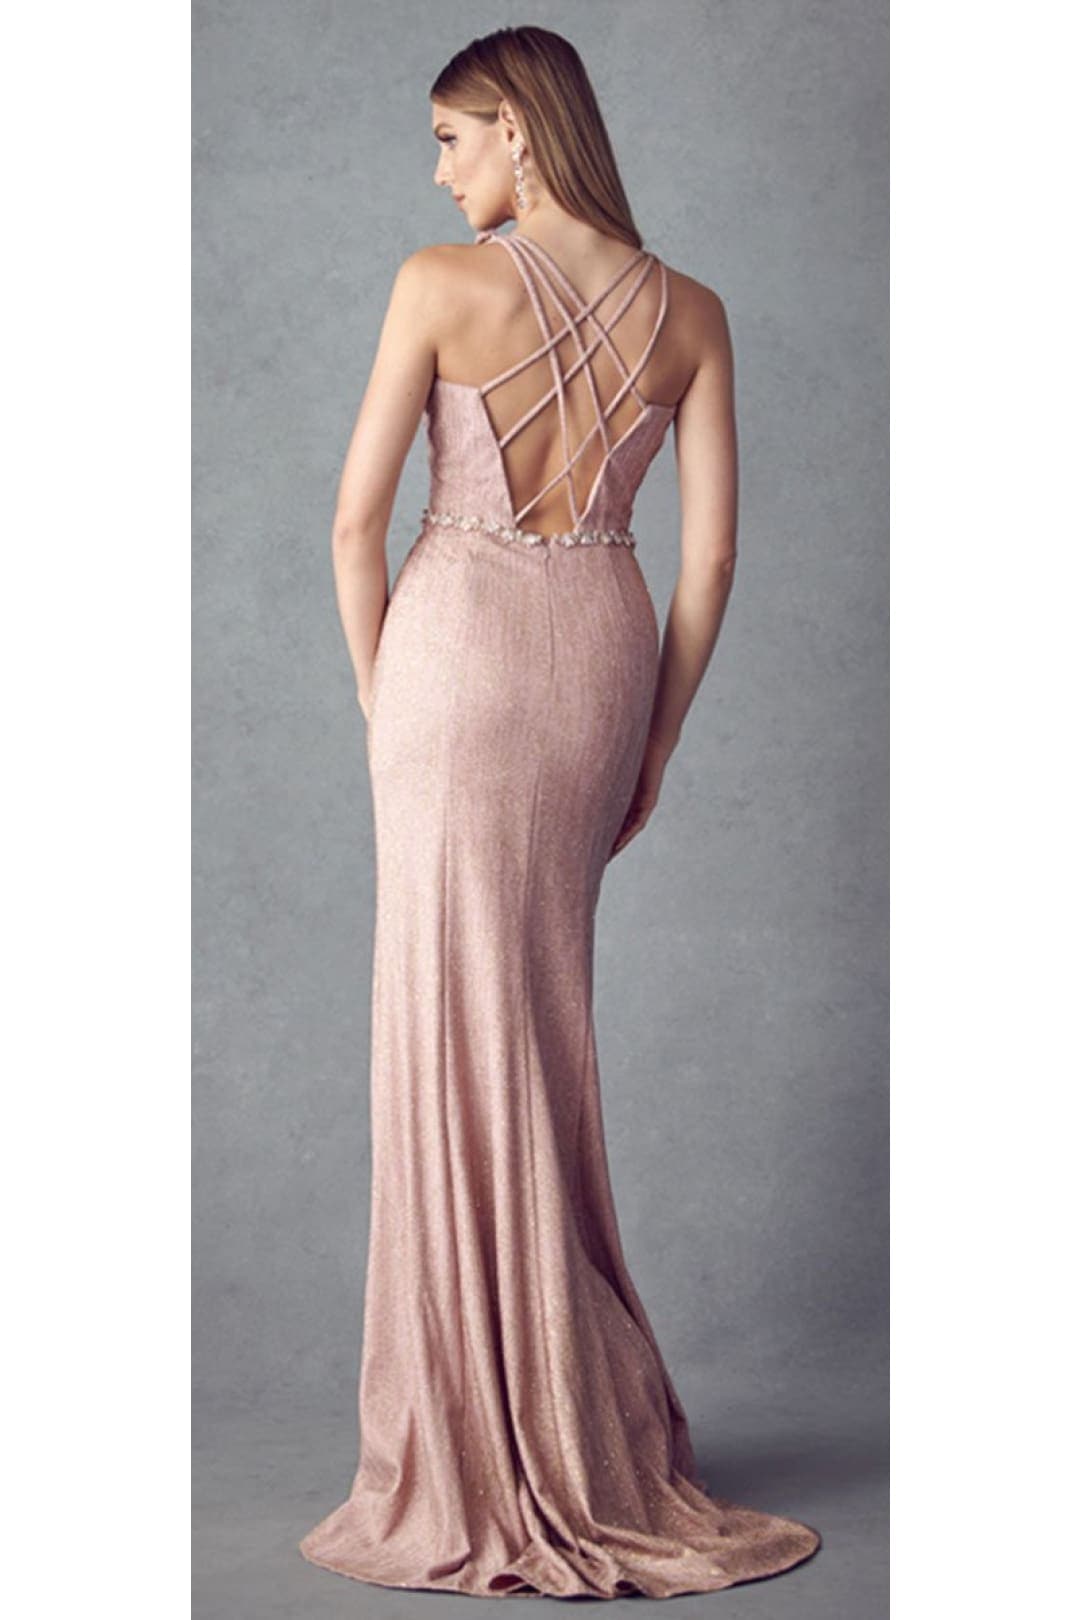 Strappy Formal Evening Gown